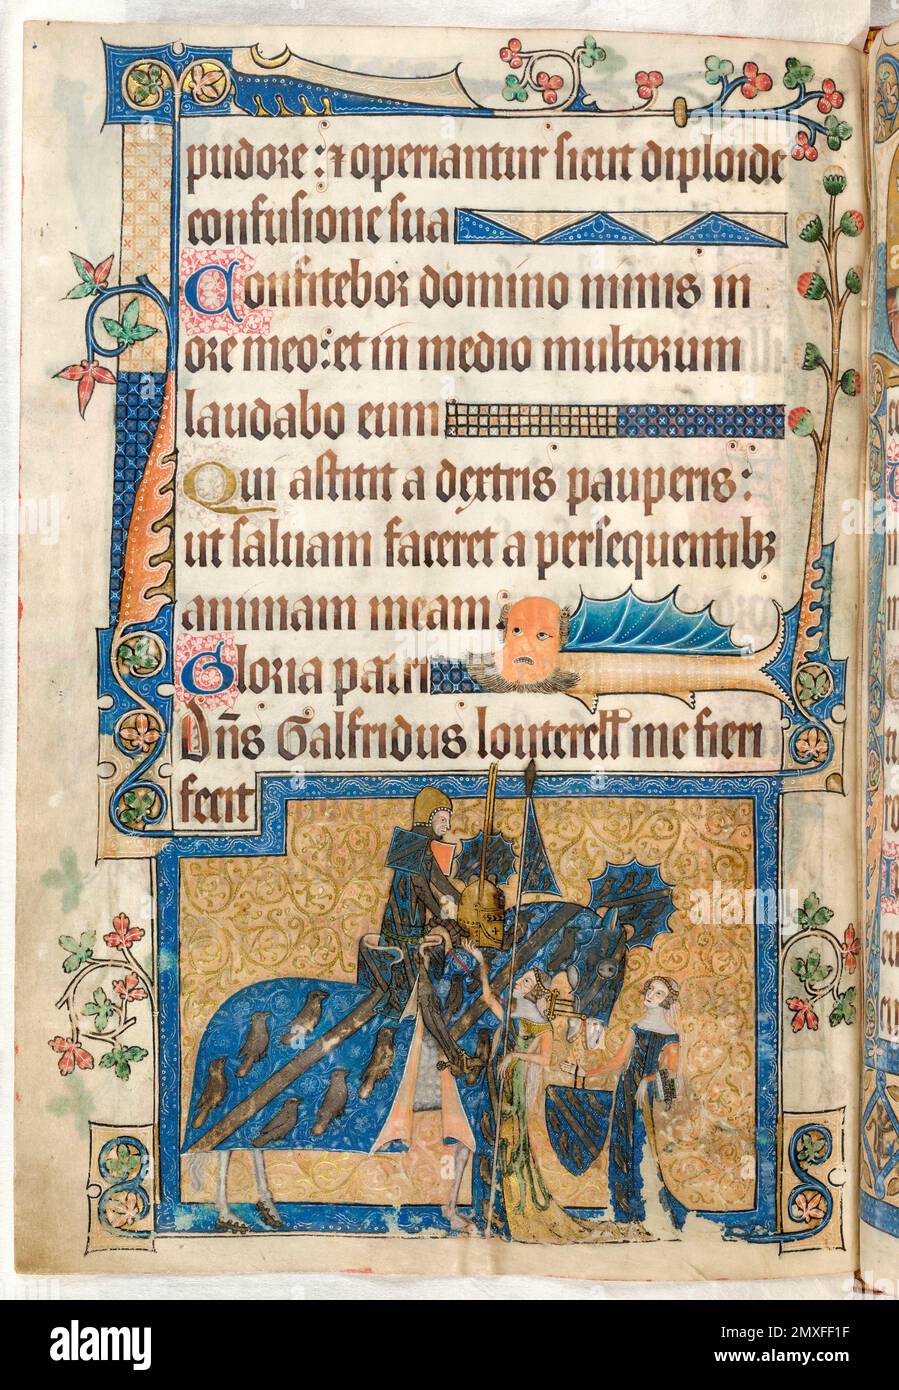 Luttrell Psalter. Sample page from the illuminated 14th century Luttrell Psalter, c. 1320-40, showing Sir Geoffrey Luttrell, mounted, being assisted by his wife and daughter-in-law Stock Photo